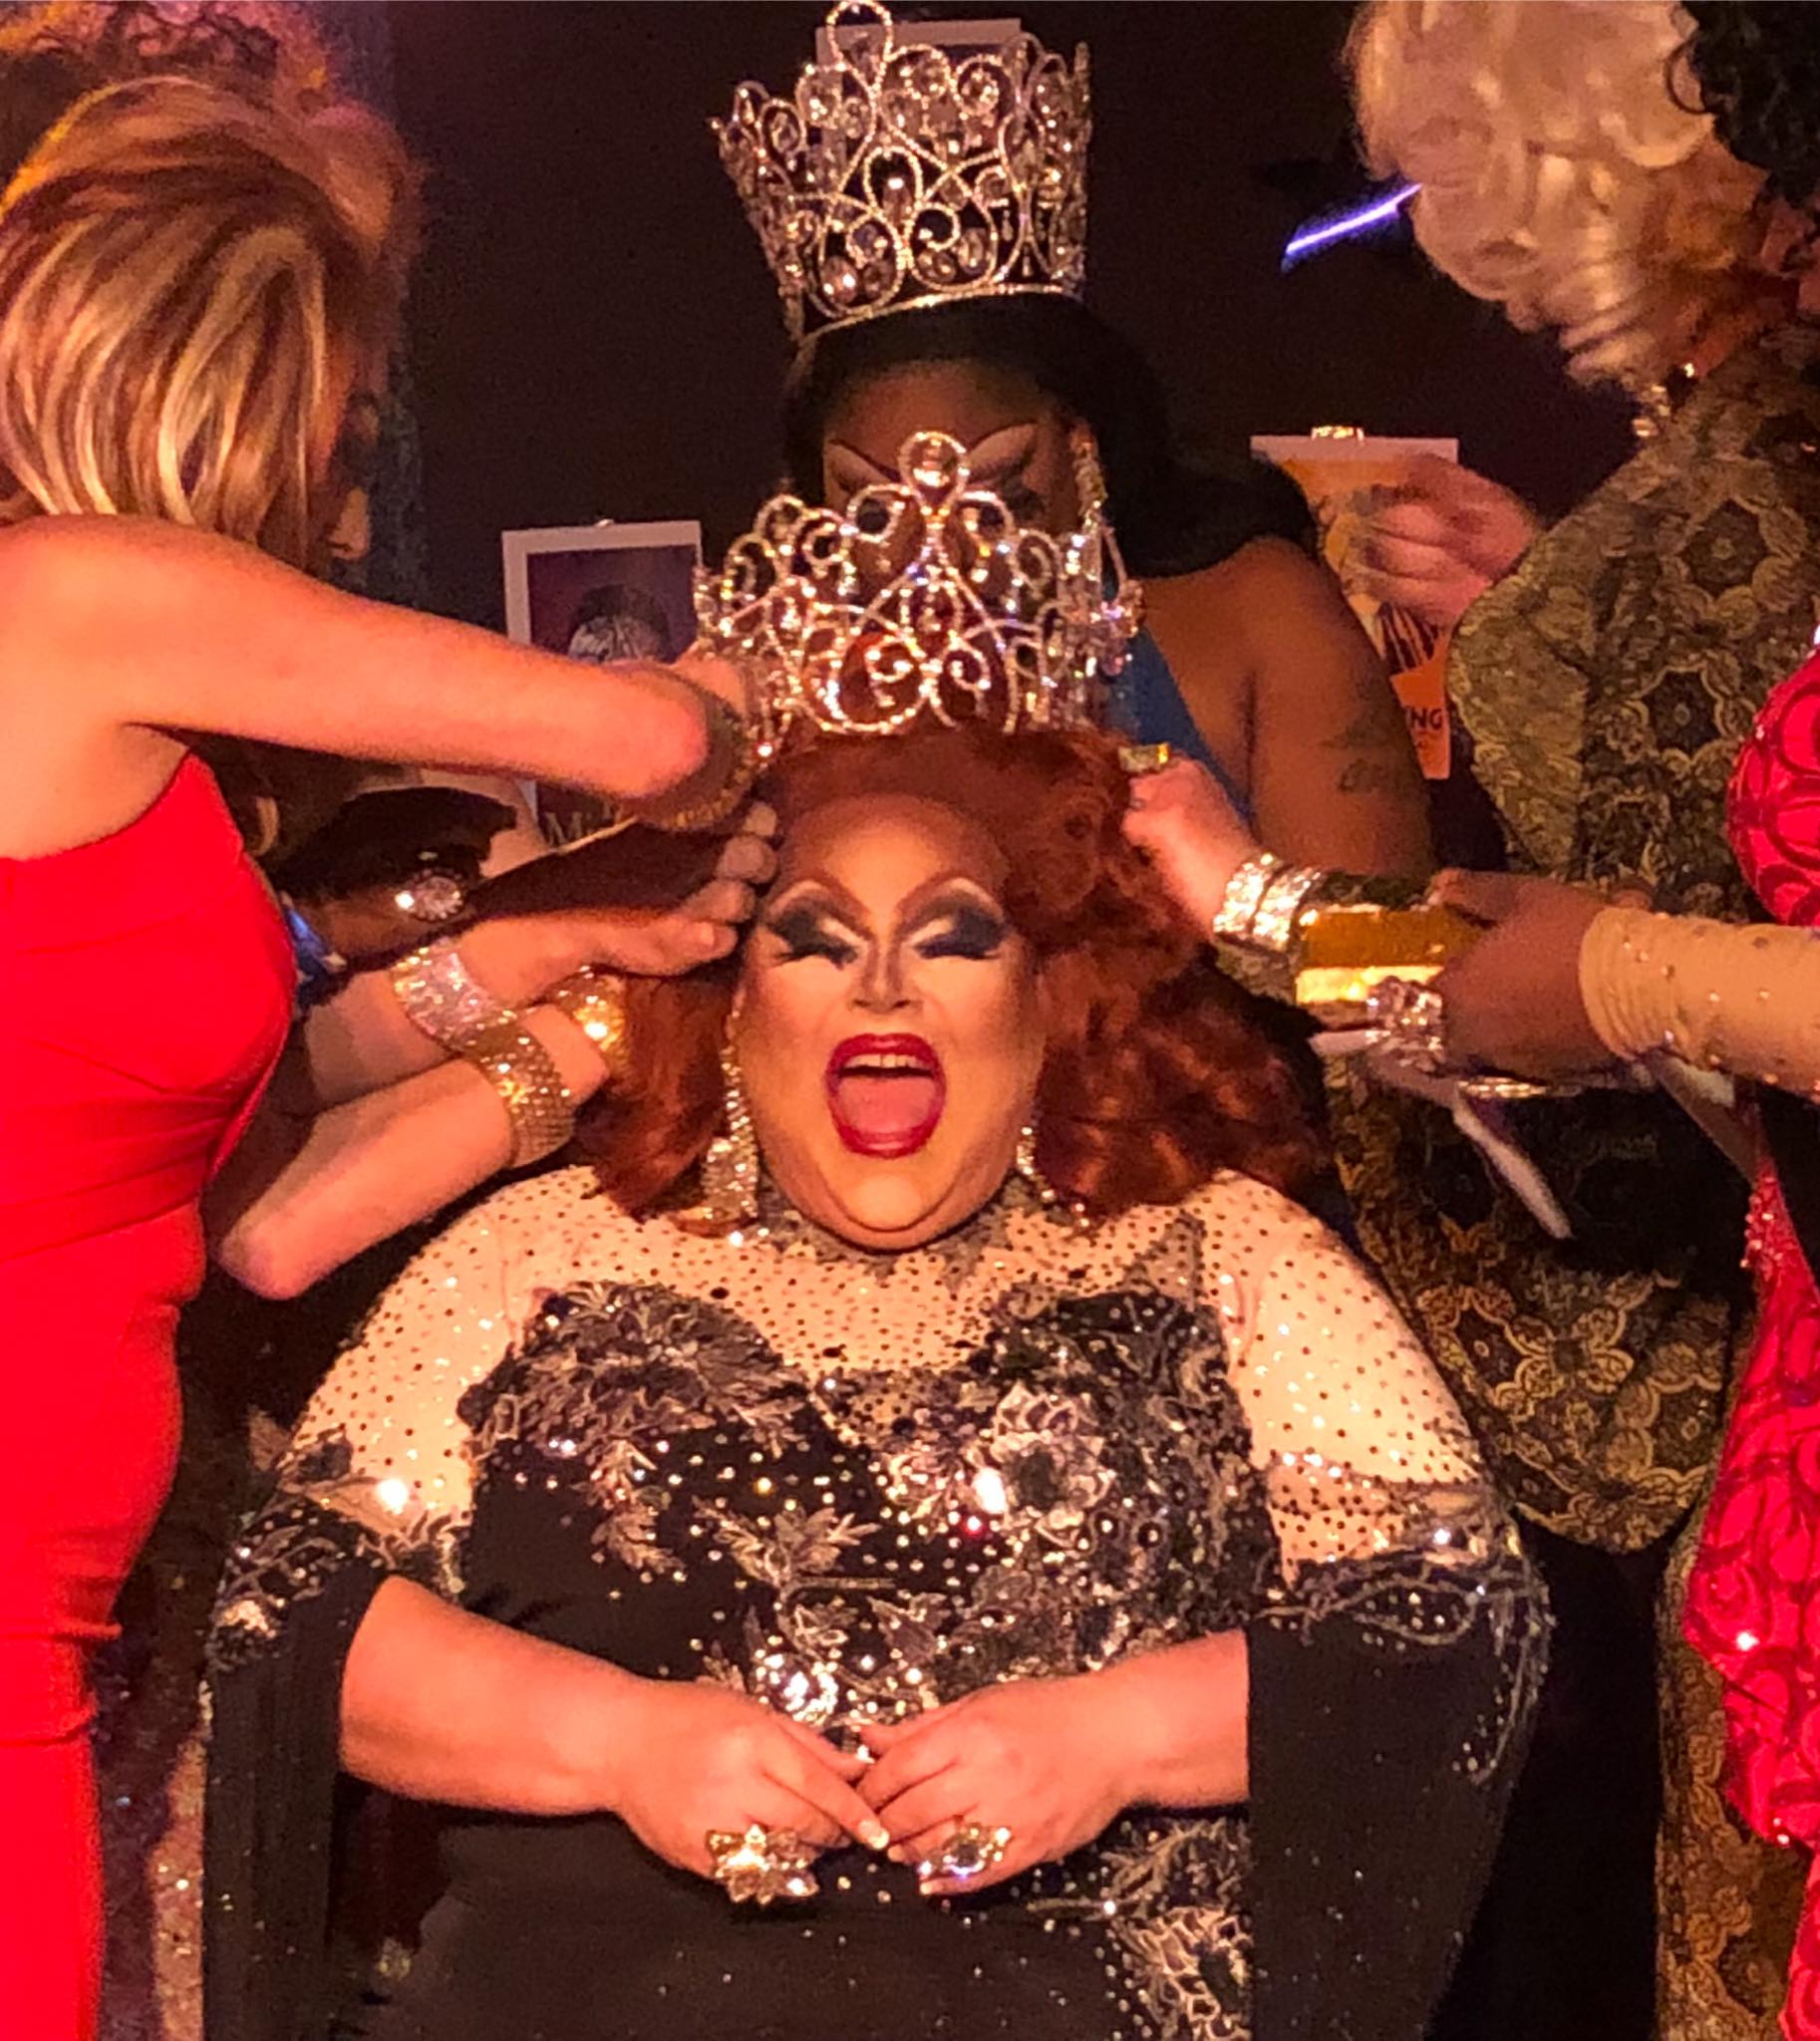 Buff Faye being crowned Miss Hide-A-Way at Large 2018 at the Hideaway in Rock Hill, South Carolina on the night of March 3rd, 2018.